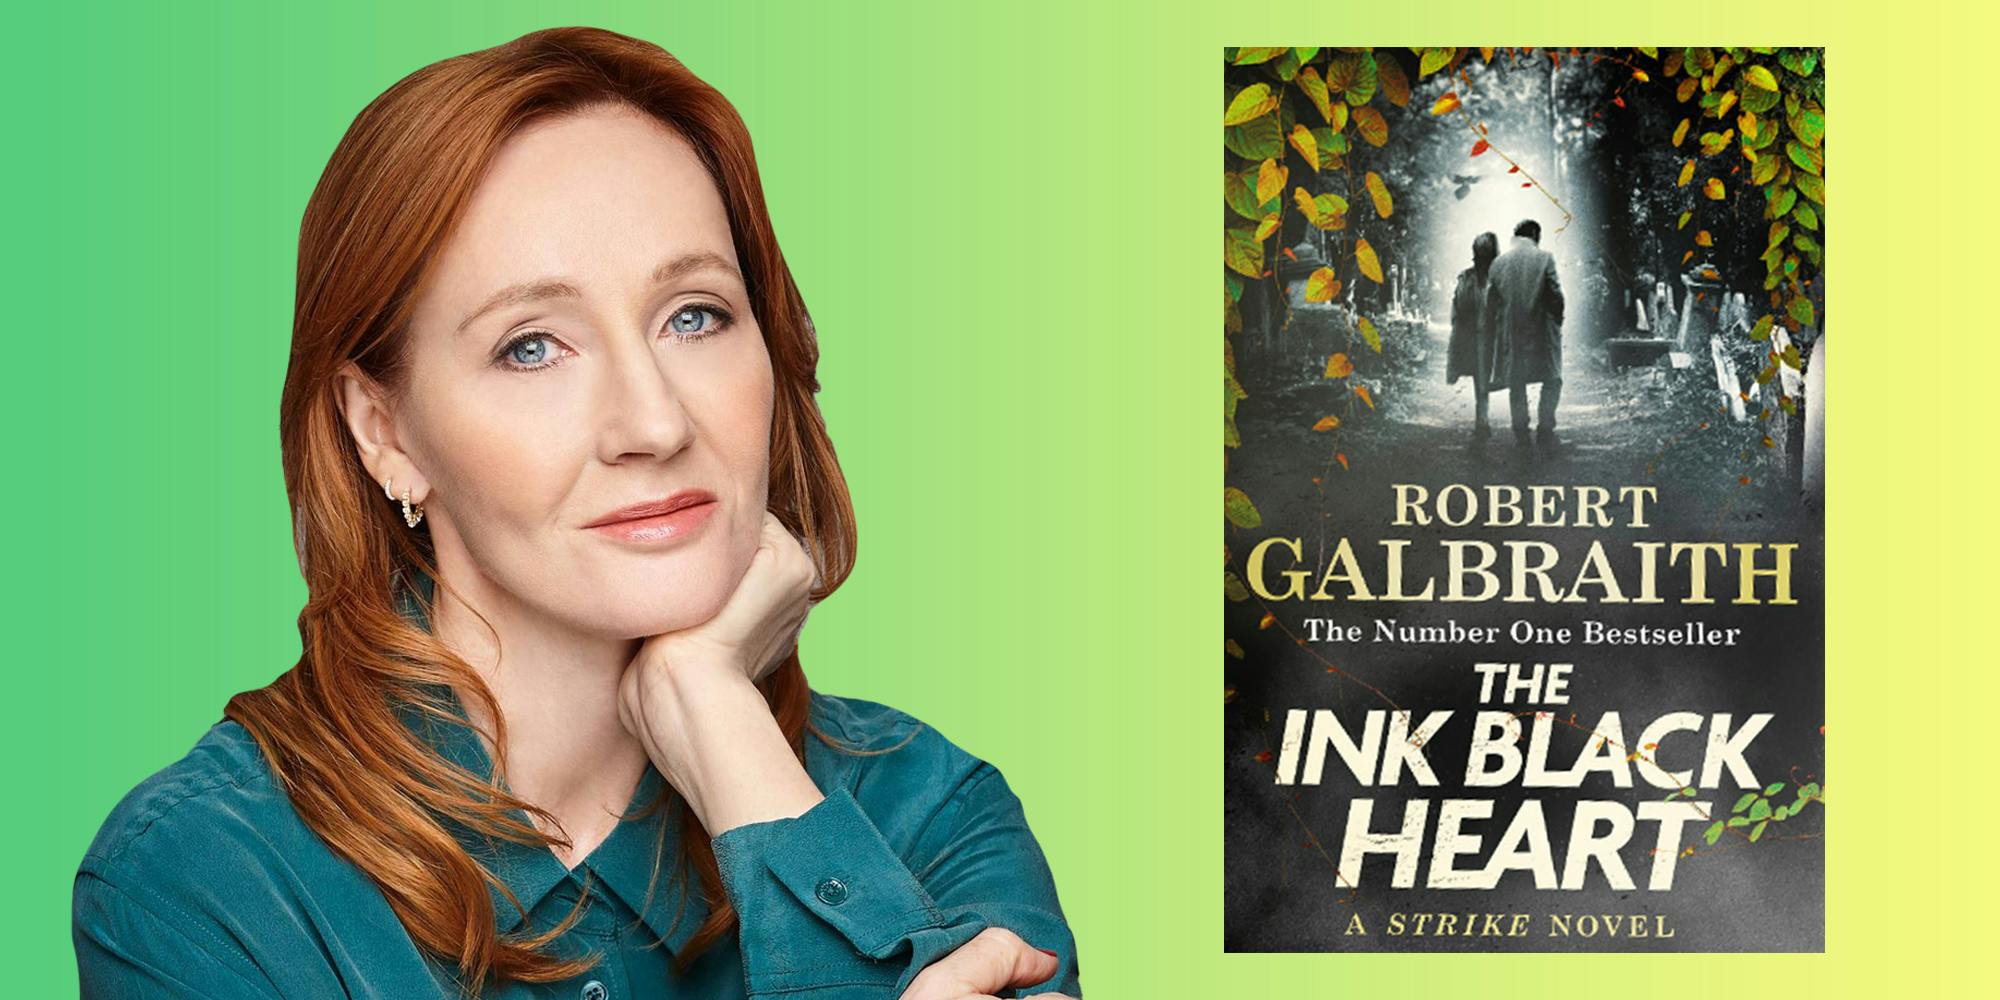 J.K. Rowling posing with hand on cheek on left with Book cover "THE INK BLACK HEART" "Robert Galbraith The Number One Bestseller A Strike Novel" on right on green to yellow gradient background